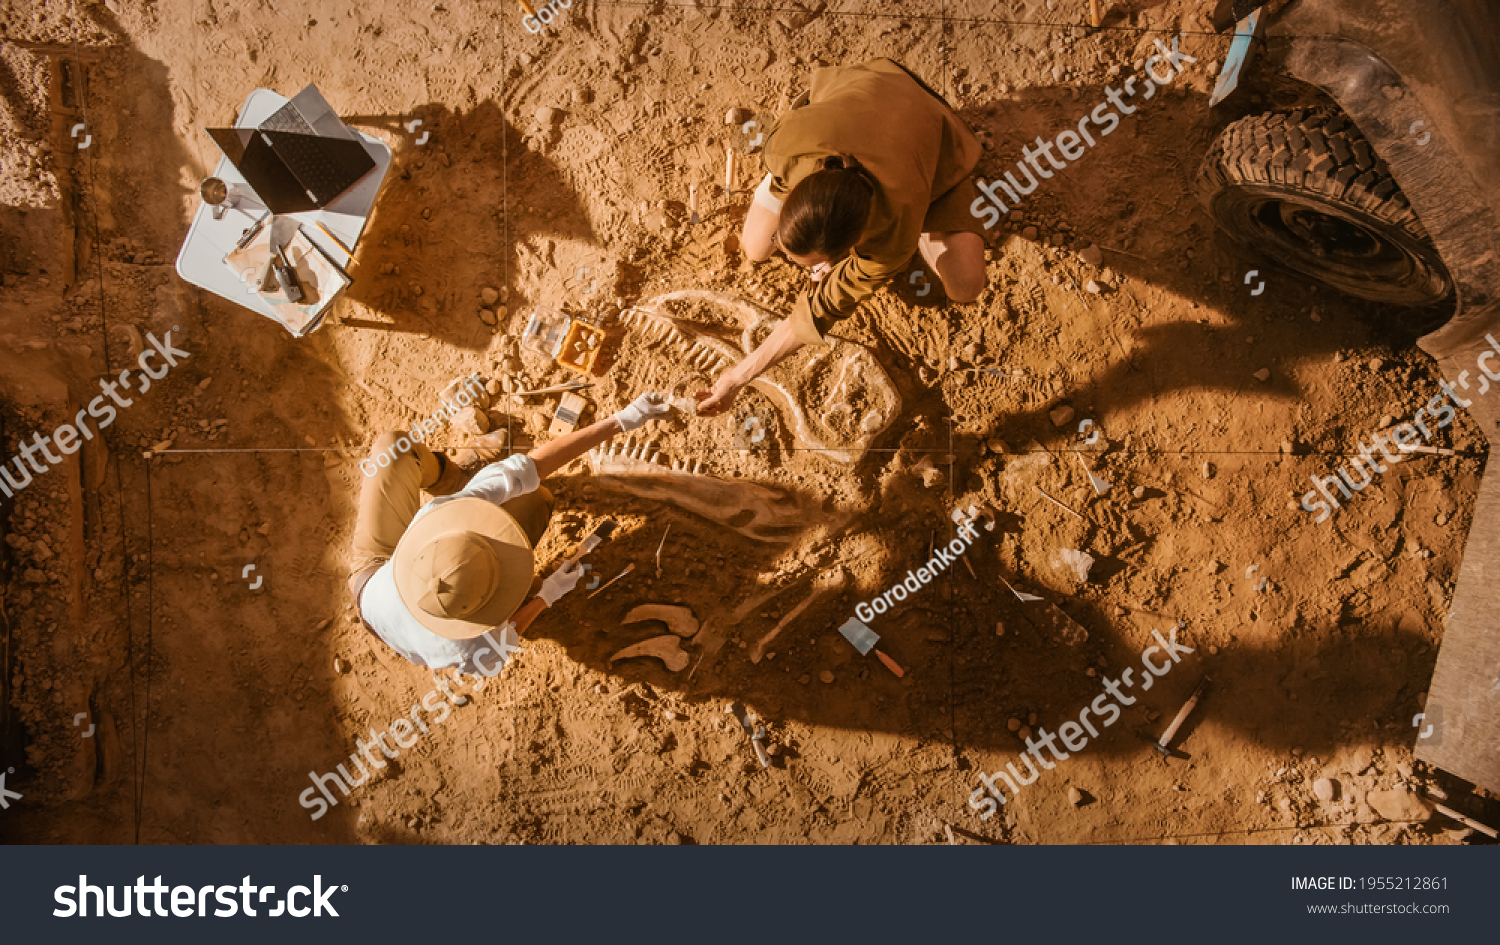 Top-Down View: Two Great Paleontologists Cleaning Newly Discovered Dinosaur Skeleton. Archeologists Discover Fossil Remains of New Species. Archeological Excavation Digging Site. #1955212861